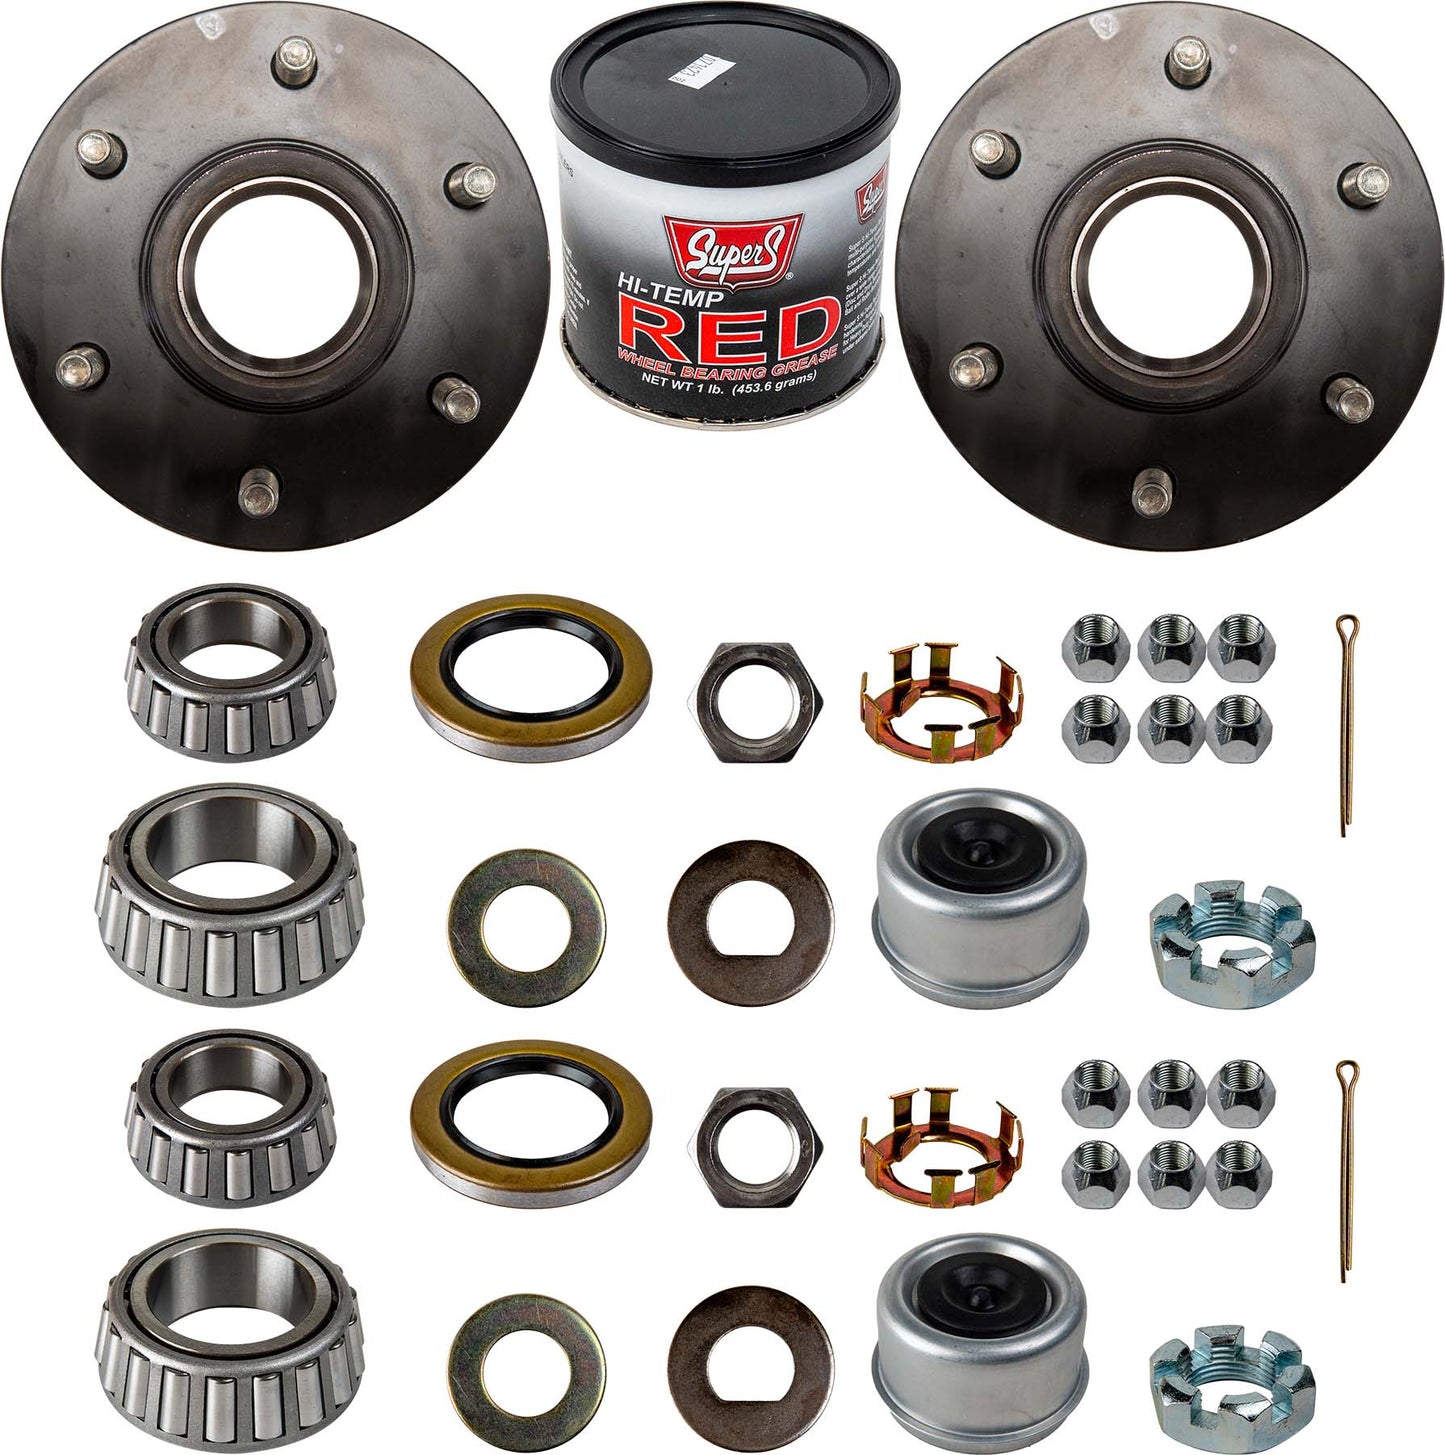 6k Trailer Axle Hub - 6 Lug - The Trailer Parts Outlet